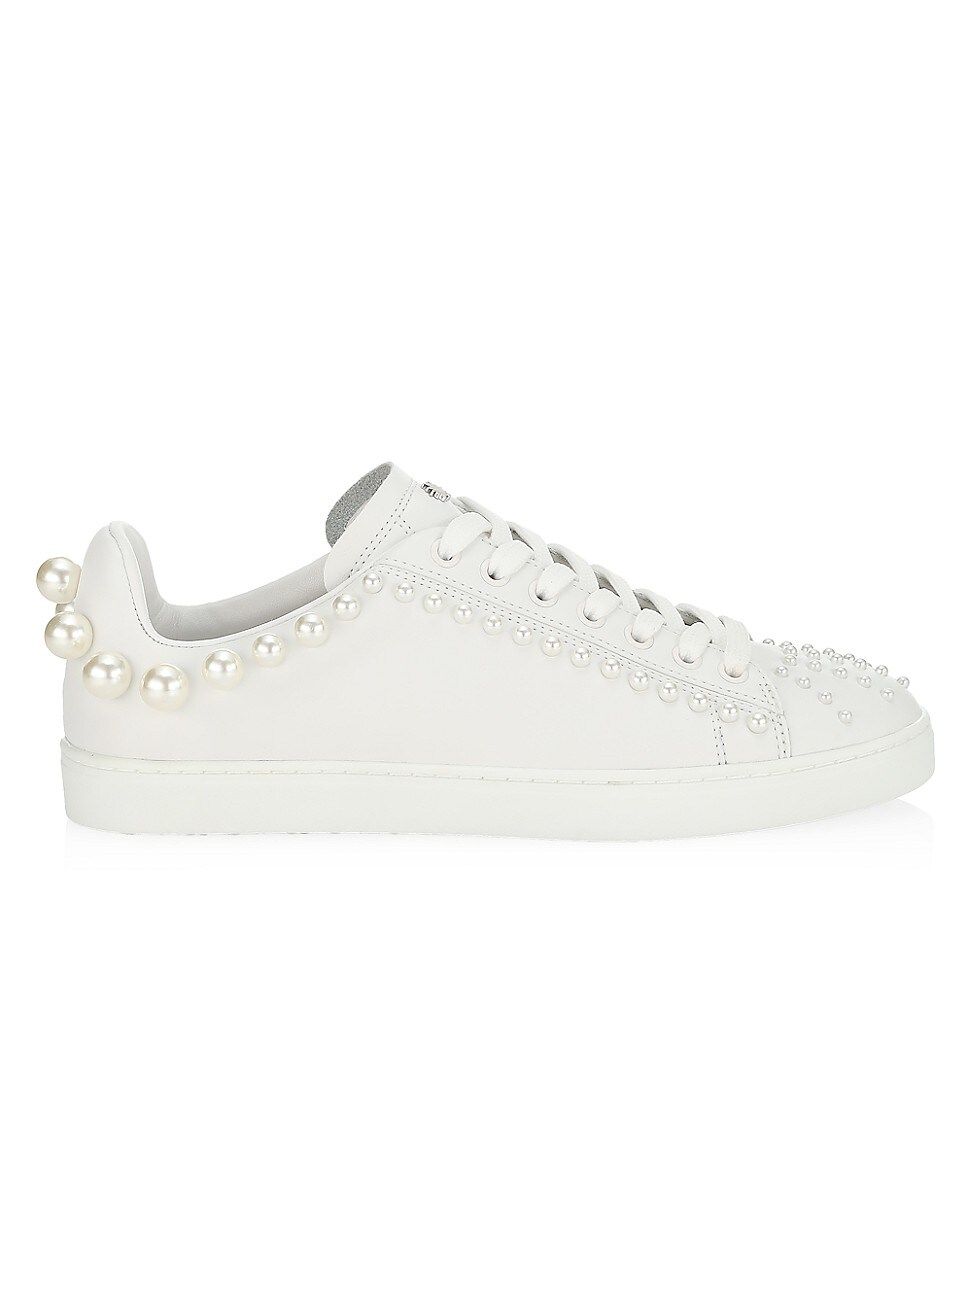 Stuart Weitzman Women's Goldie Embellished Leather Sneakers - White - Size 8.5 | Saks Fifth Avenue